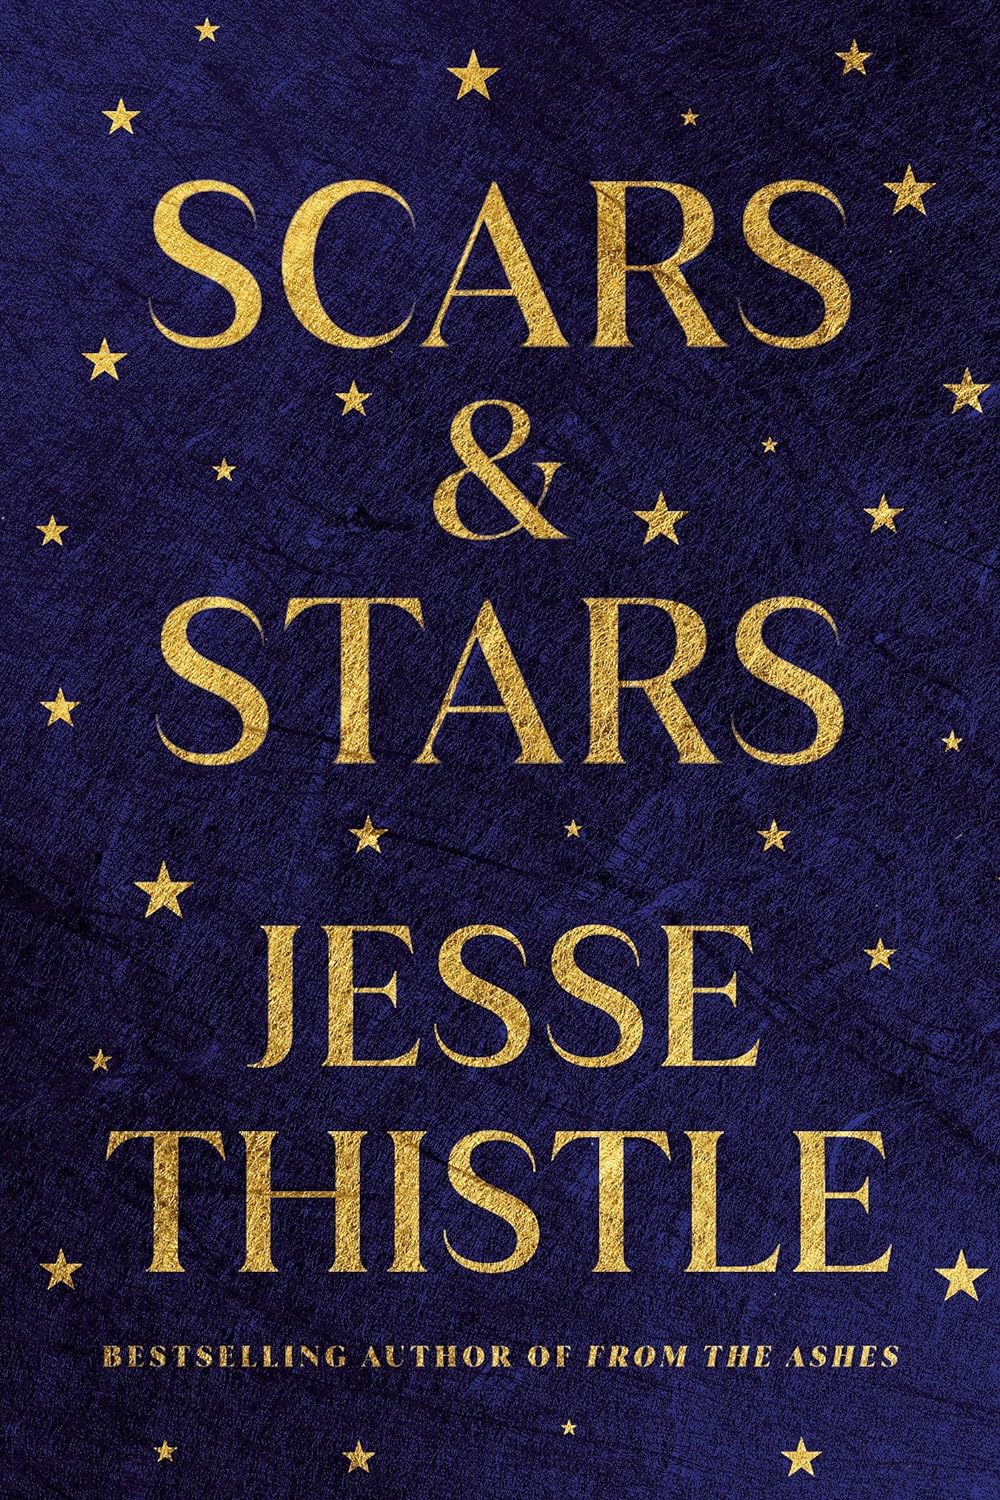 Book cover of scars and stars by Jesse Thistle